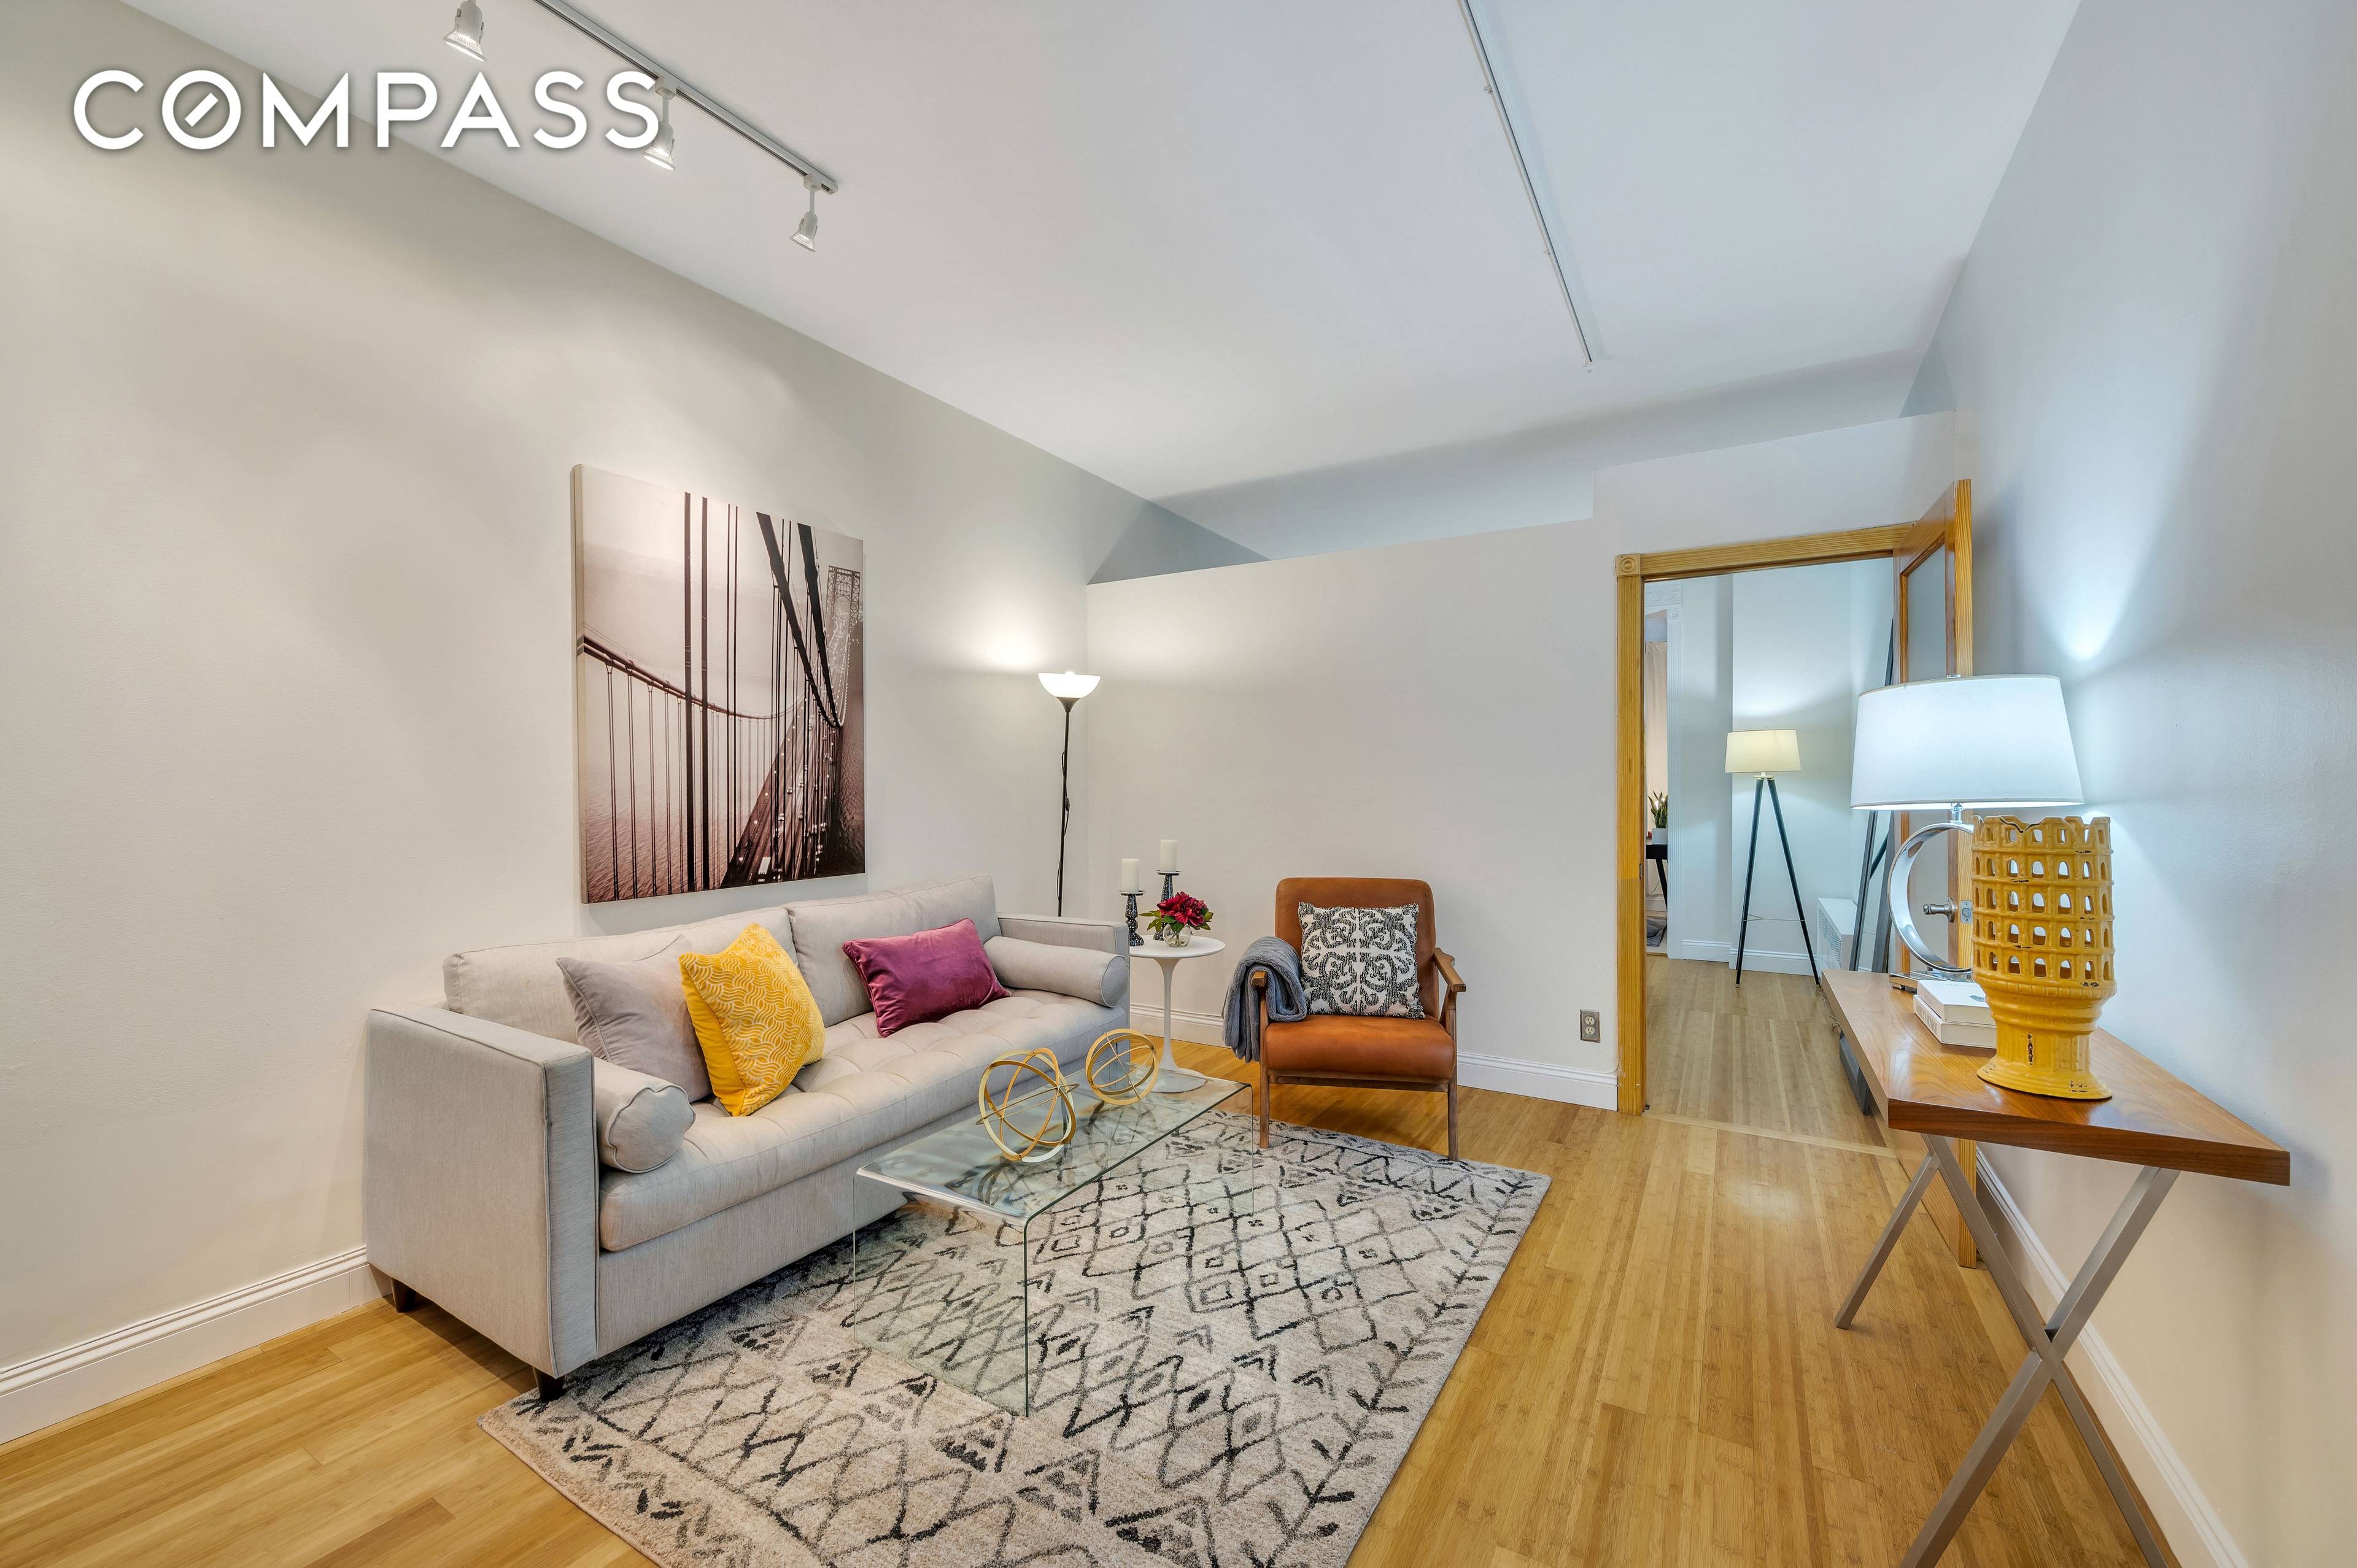 Loft like gem with ten foot ceilings, hardwood floors and an incredibly versatile layout.